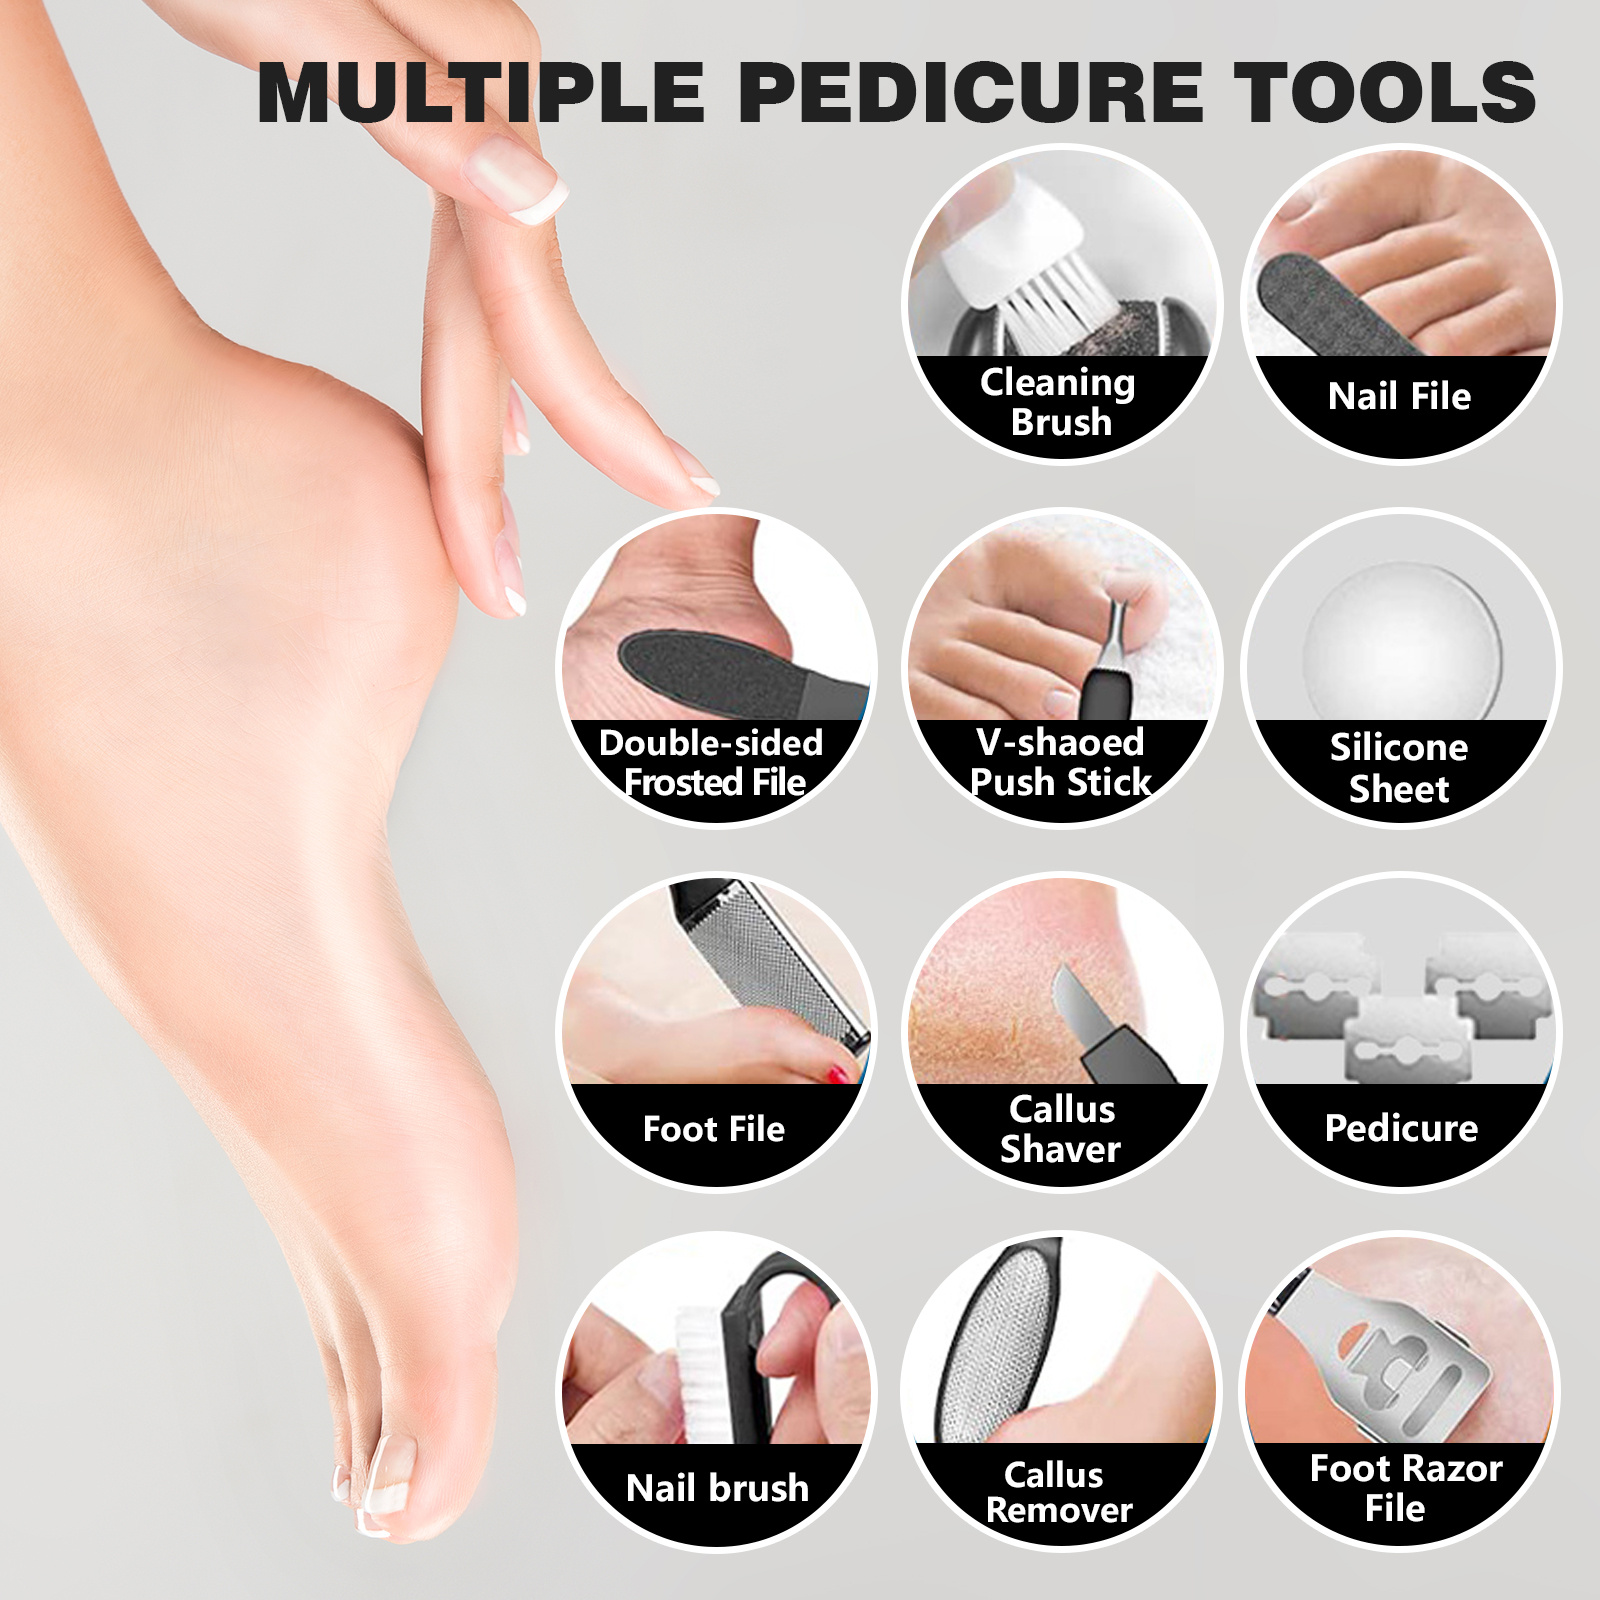 Electric Callus Remover for Feet Rechargeable, 15 in 1 Pedicure